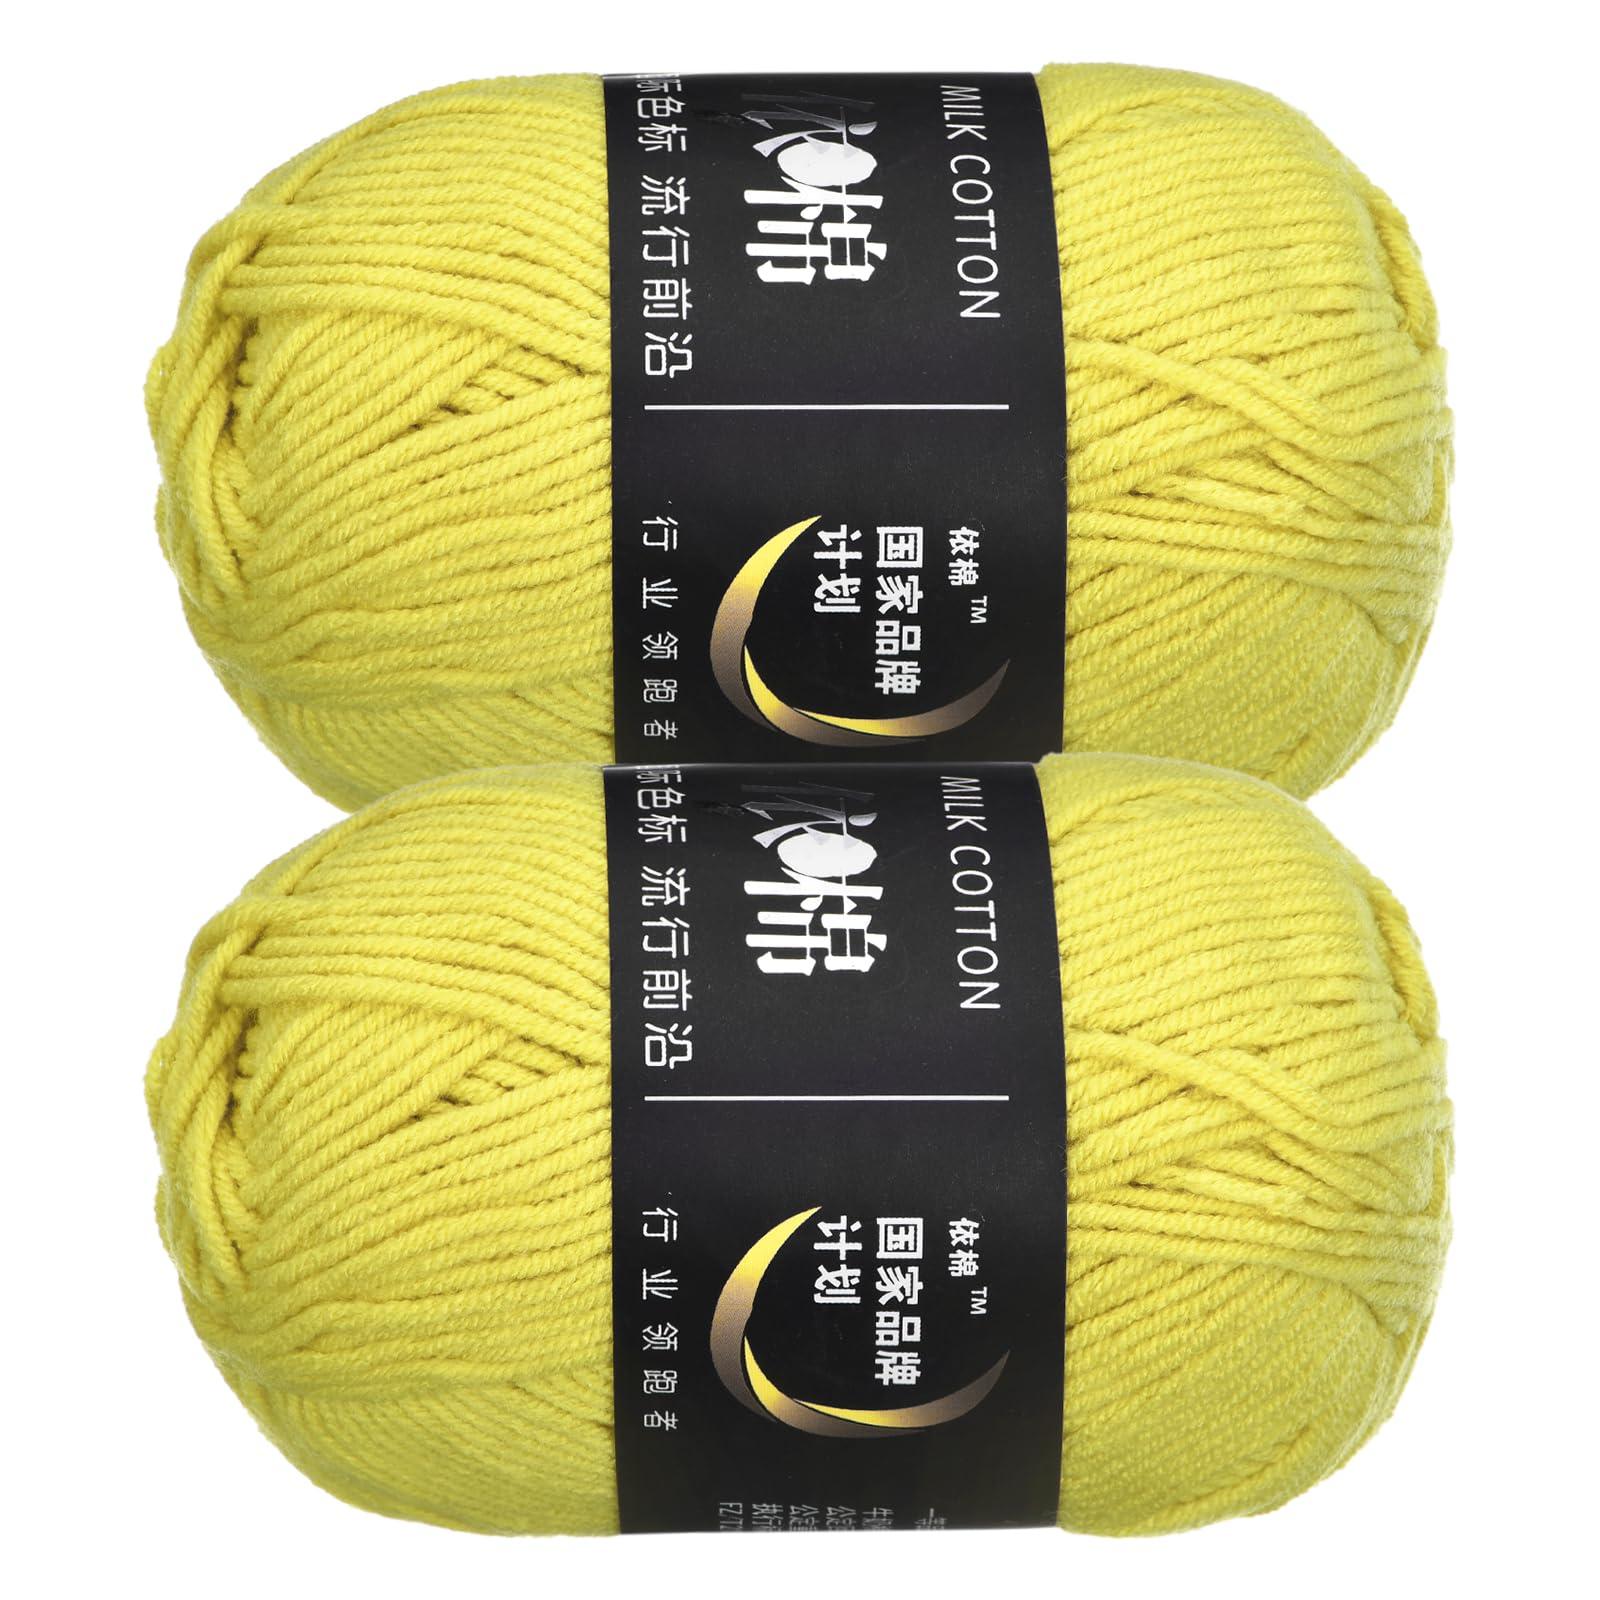 sourcing map Acrylic Yarn Skeins, 2 Pack of 50g/1.76oz Soft Crochet Yarns for Knitting and Crocheting Craft Project, Yellow-Green